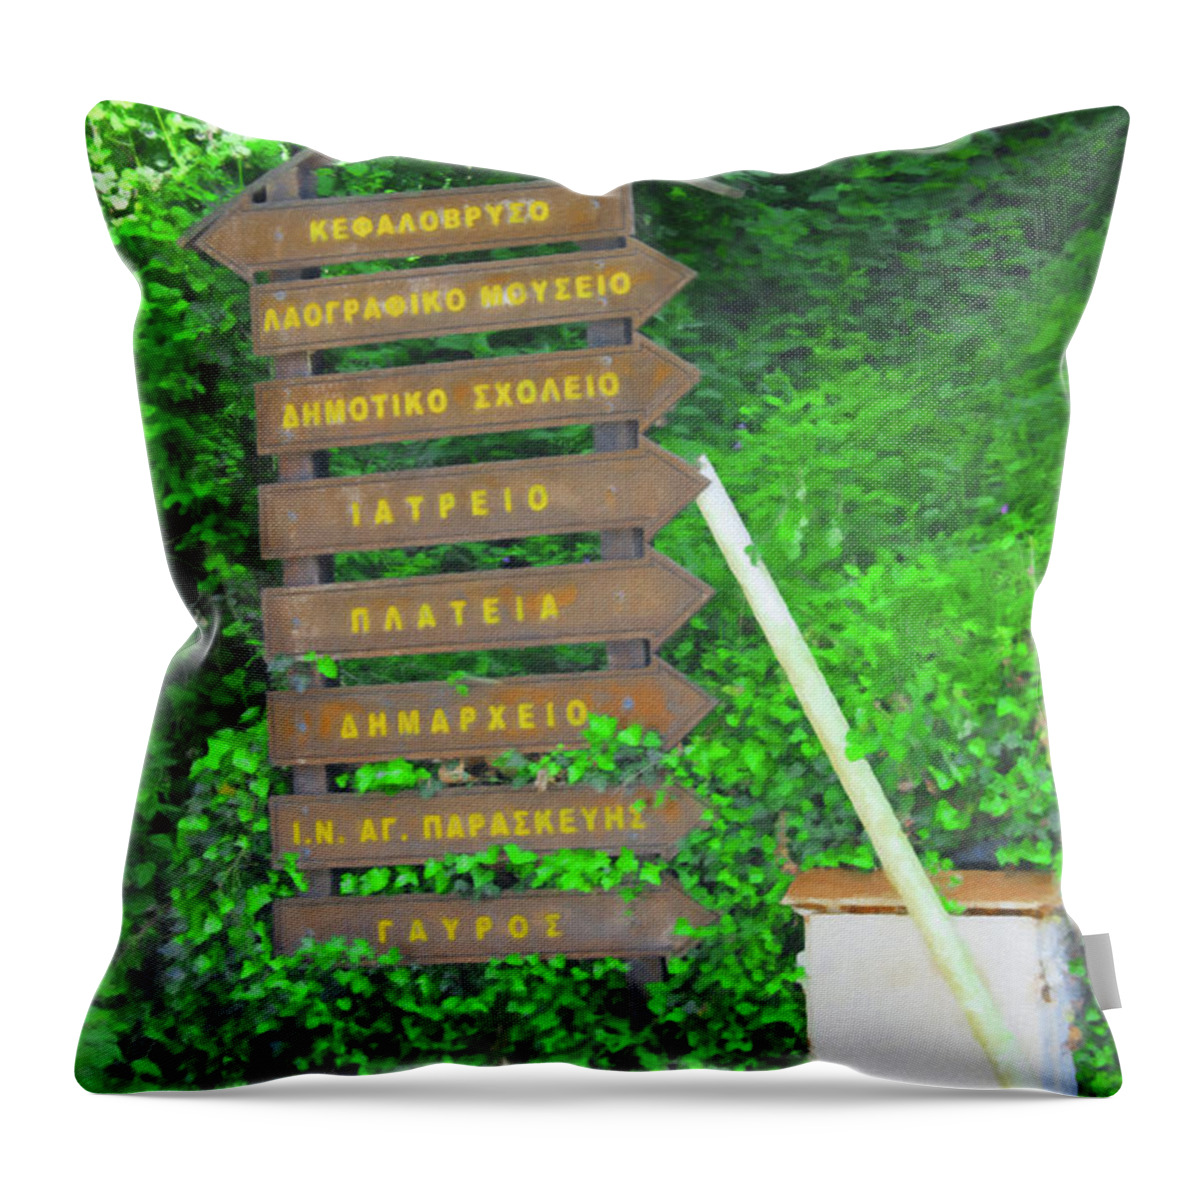 Who Know's The Way Throw Pillow featuring the digital art Greek Path Sign by Donna L Munro